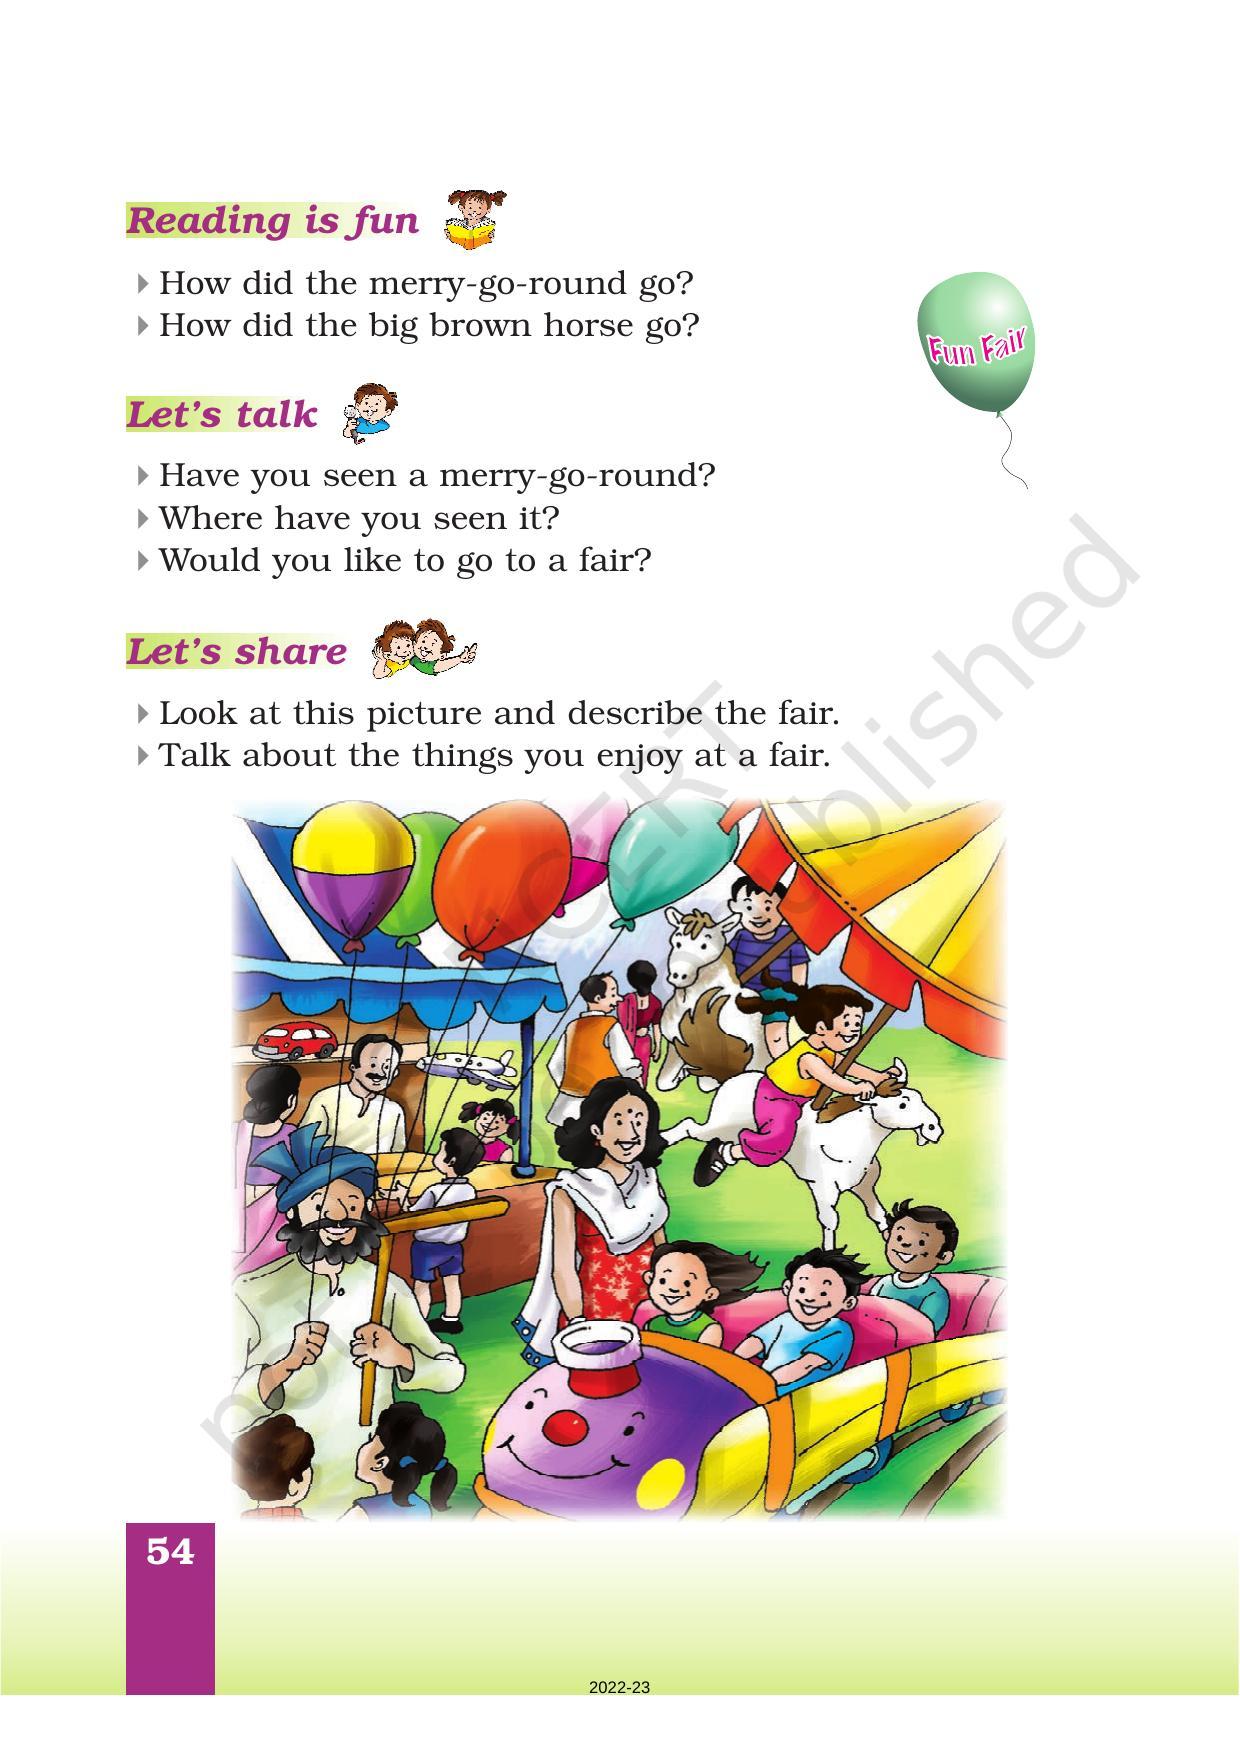 NCERT Book for Class 1 English (Marigold):Unit 5 Poem-Merry-Go-Round - Page 2